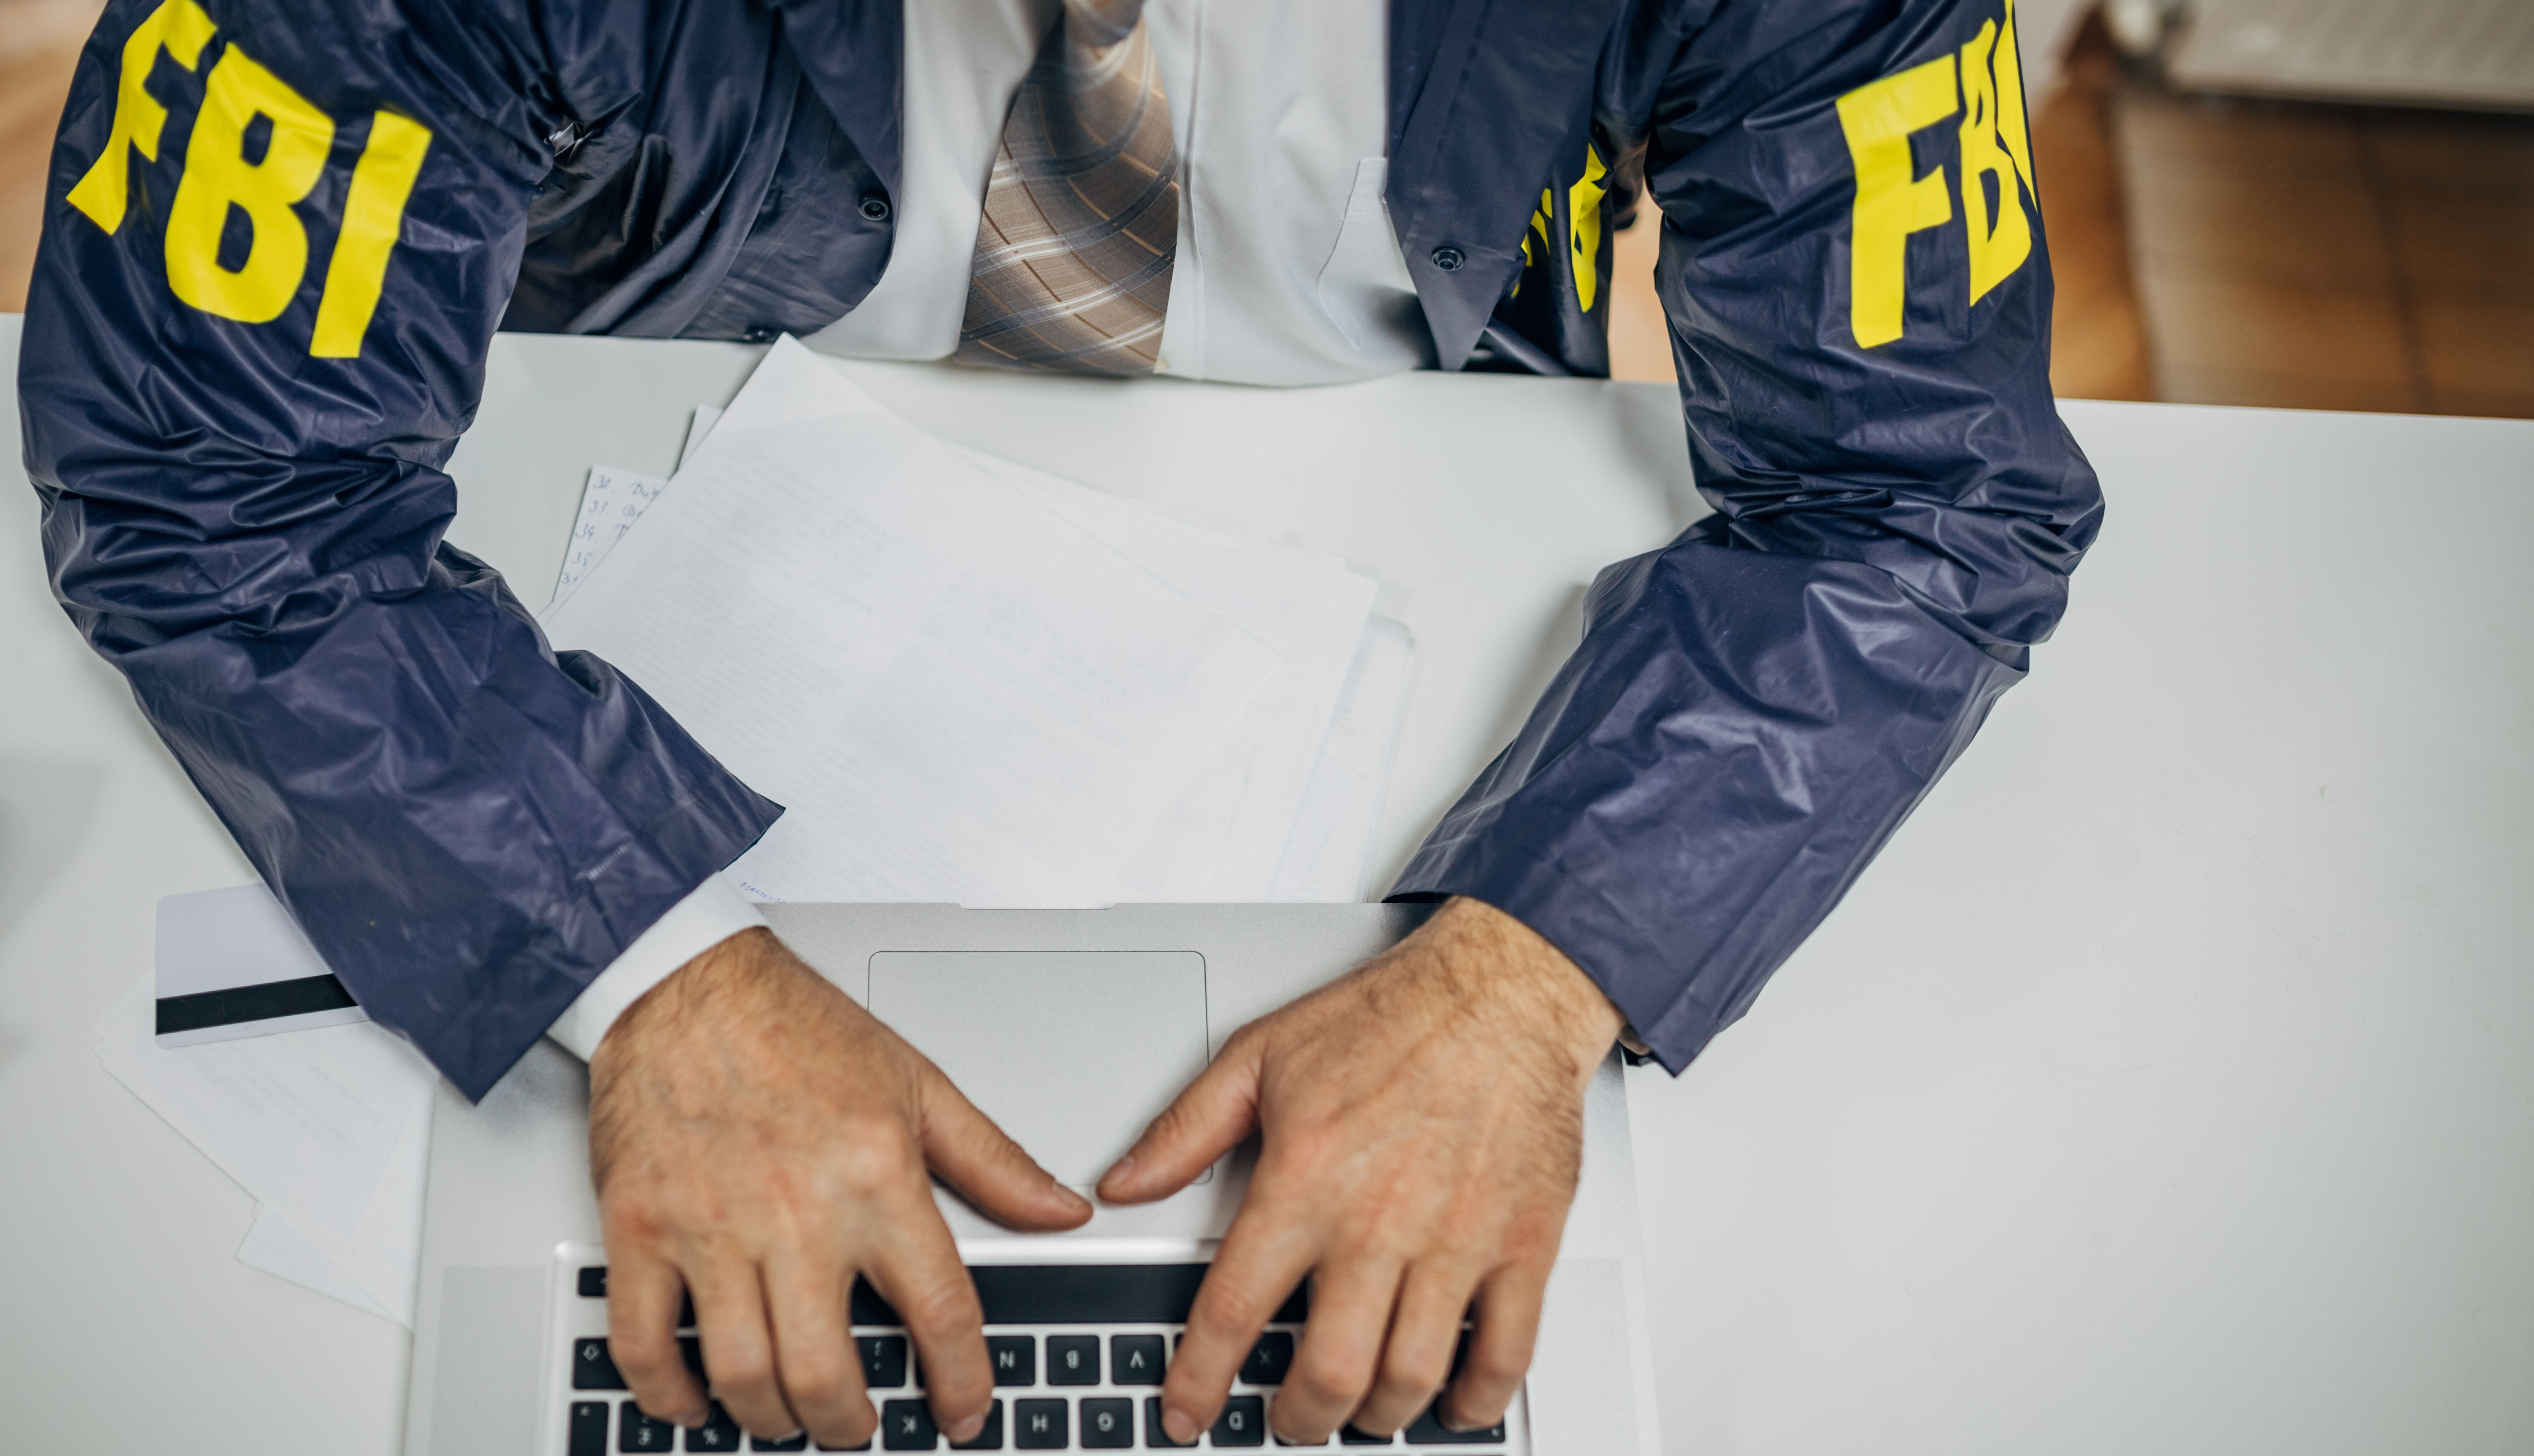 The torso of a FBI agent wearing a blue FBI jacket and typing on his computer.